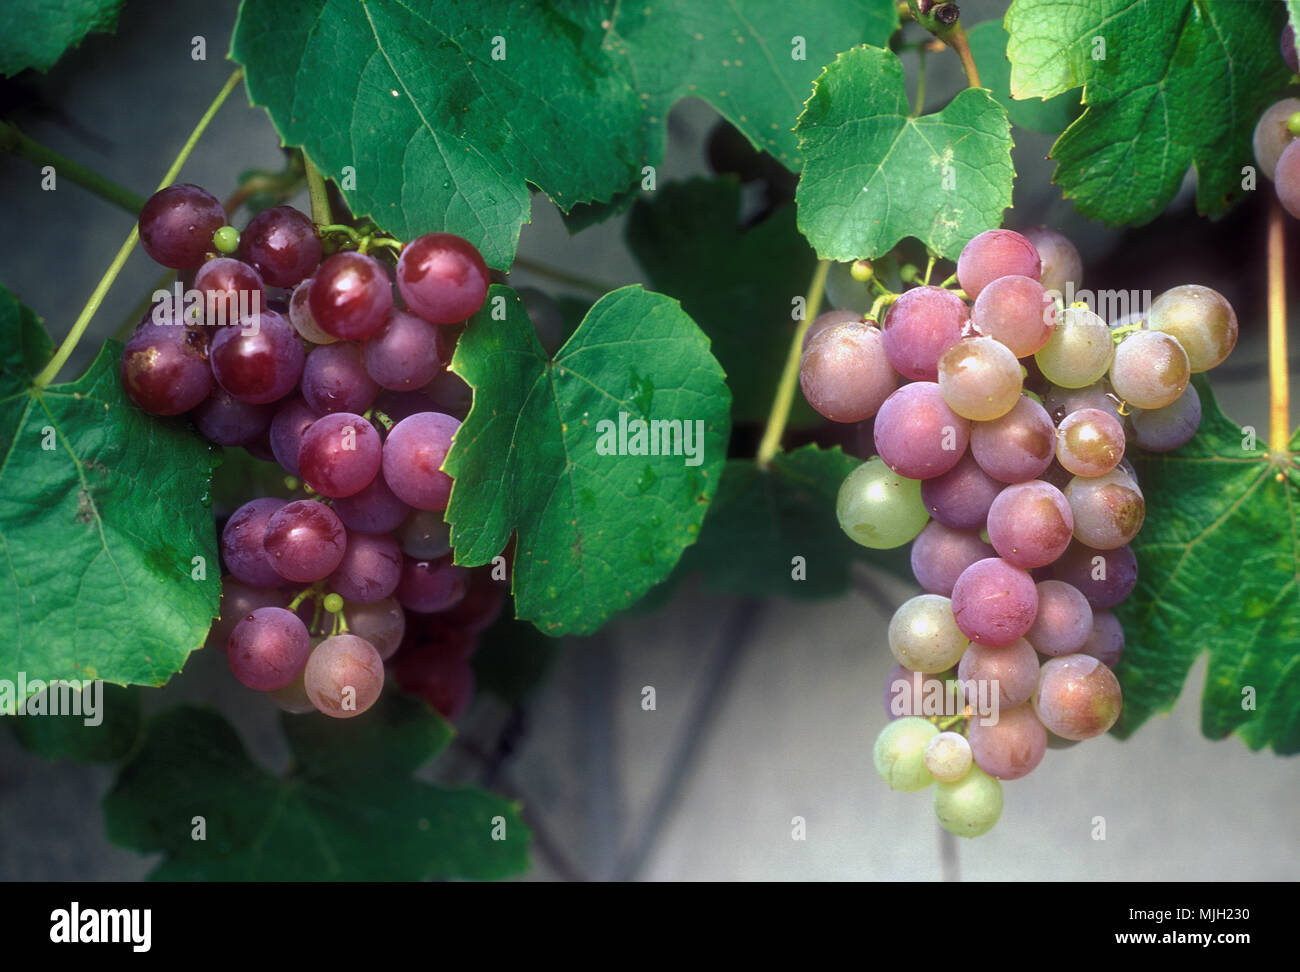 Bunches of grapes (Vitis vinifera) growing Stock Photo